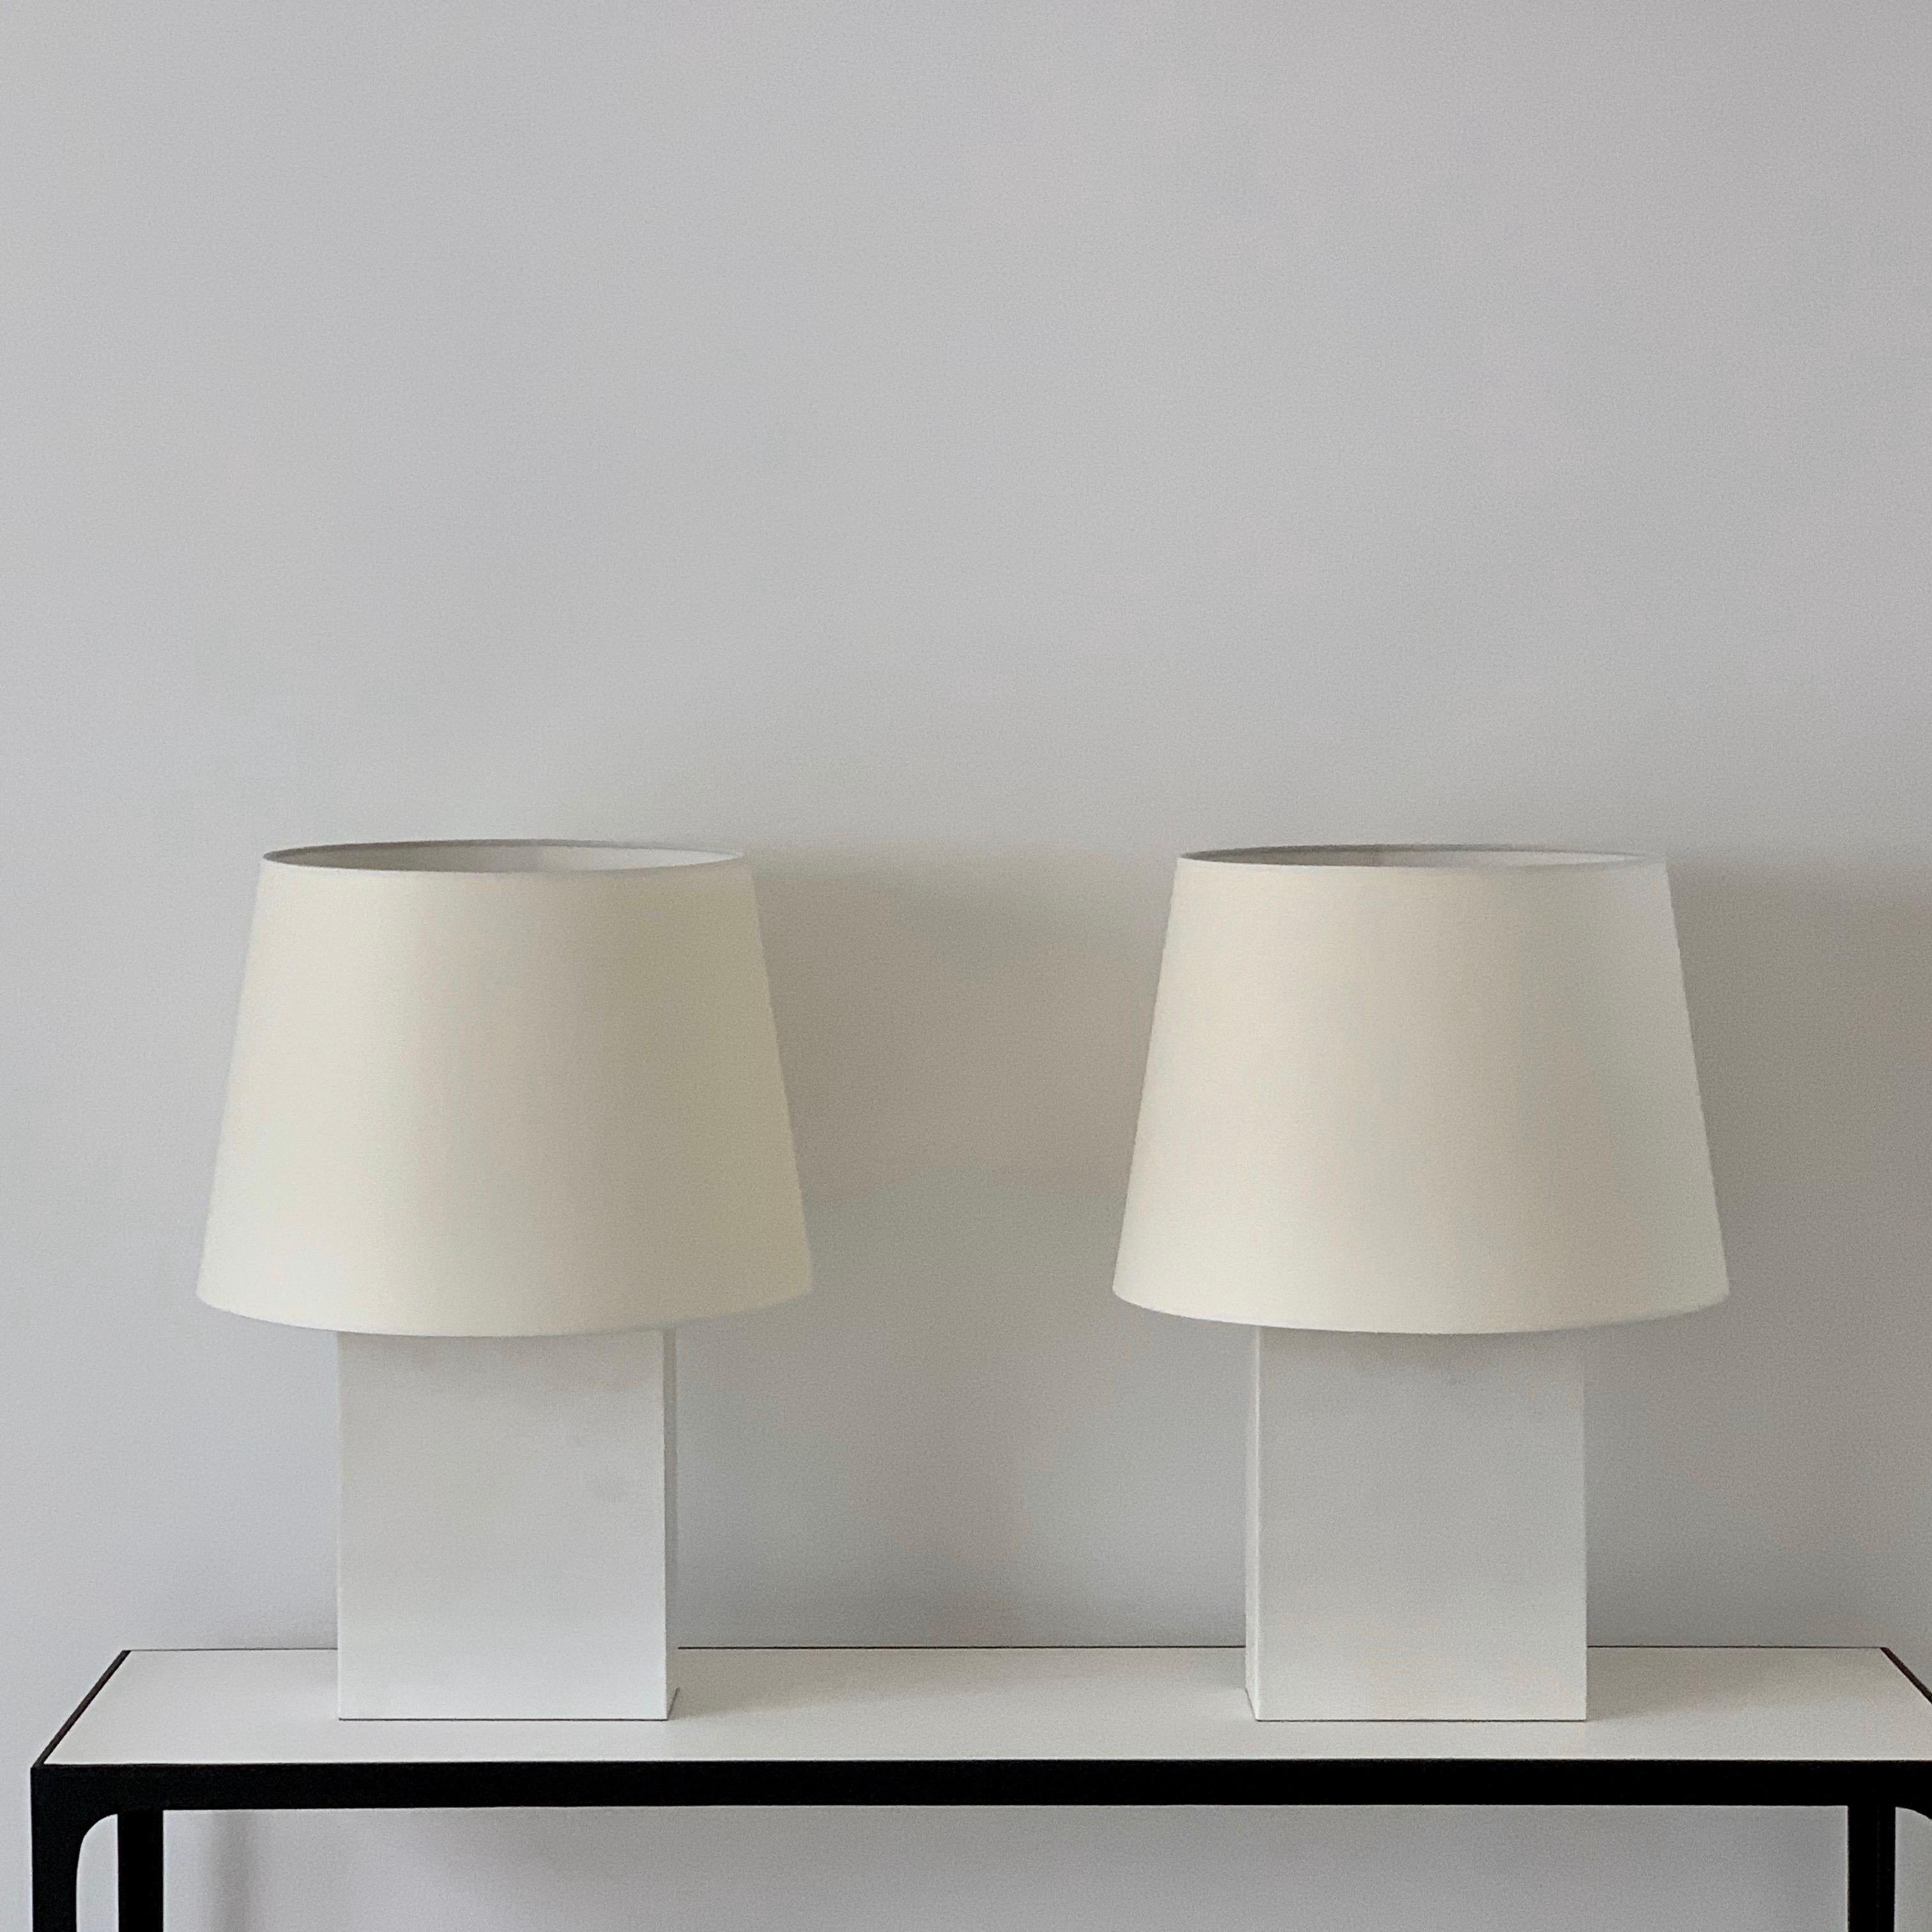 Pair of large 'Bloc' parchment lamps by Design Frères.

Attractive European style shade mounts with no apparent harps / finals. The pair comes with the matching custom parchment paper shades shown.

Handmade with real goatskin parchment and wired